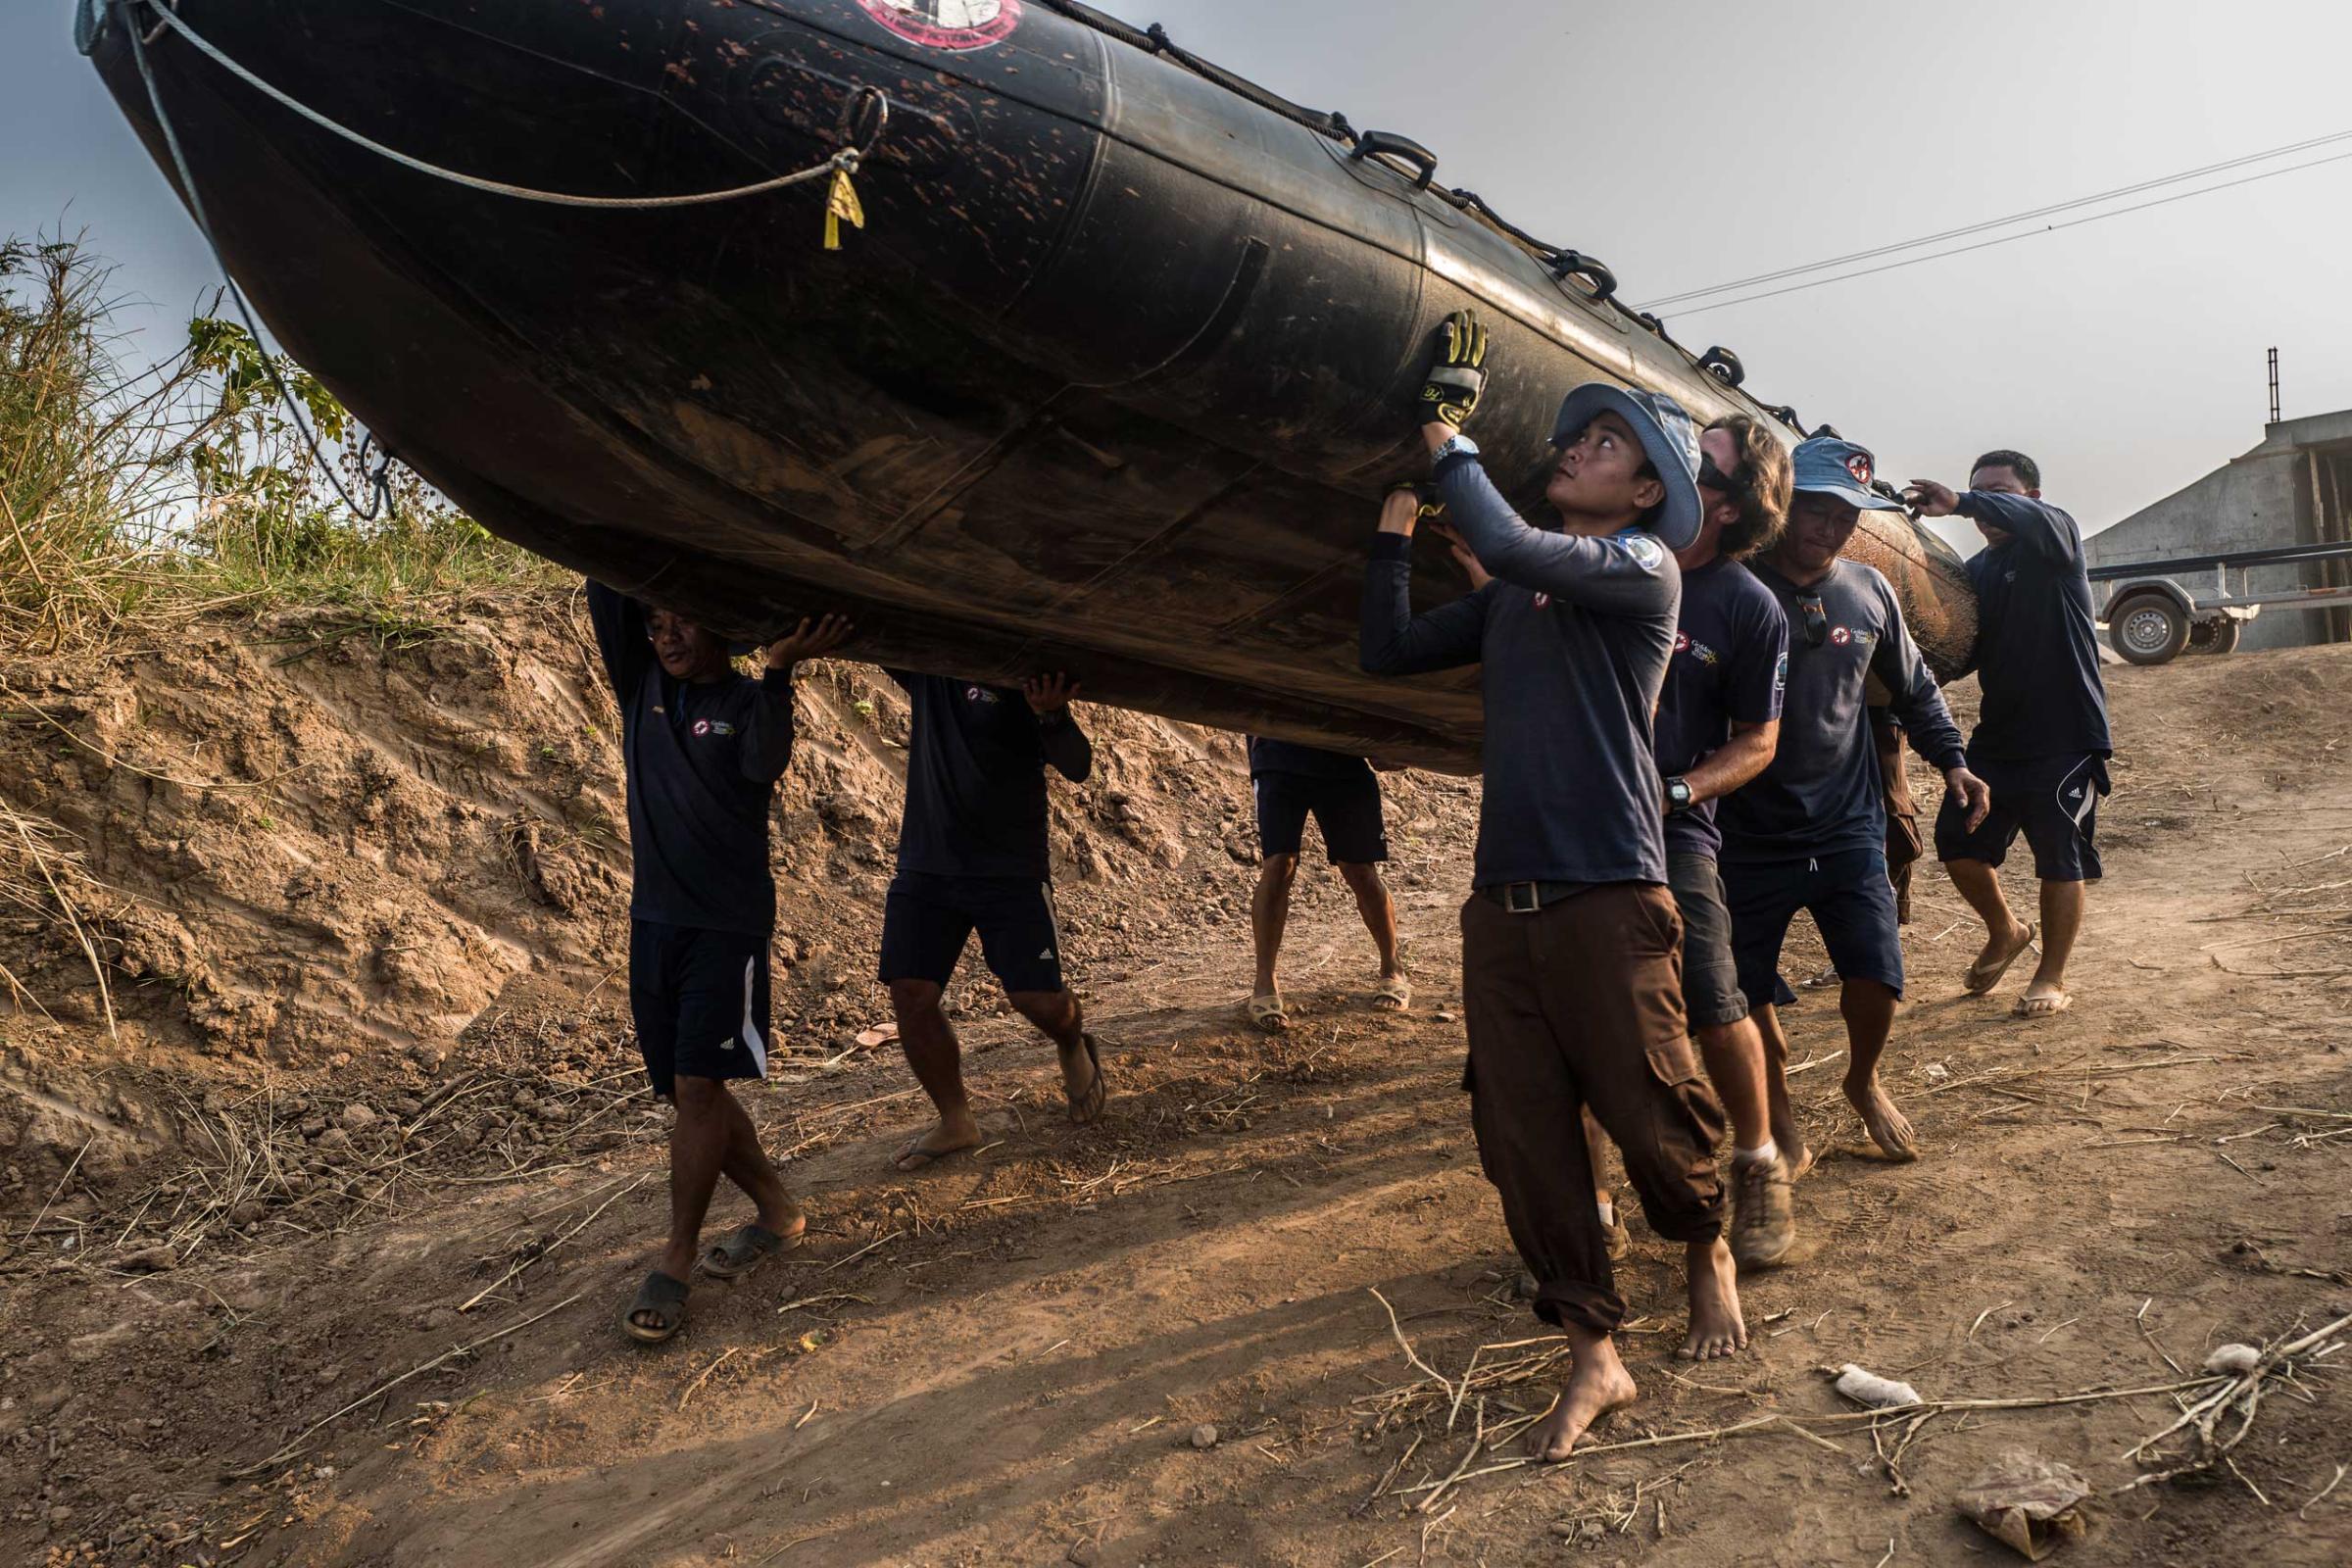 The diver team carries an inflatable boat down the banks of the Tonle Sap river in March 2016.